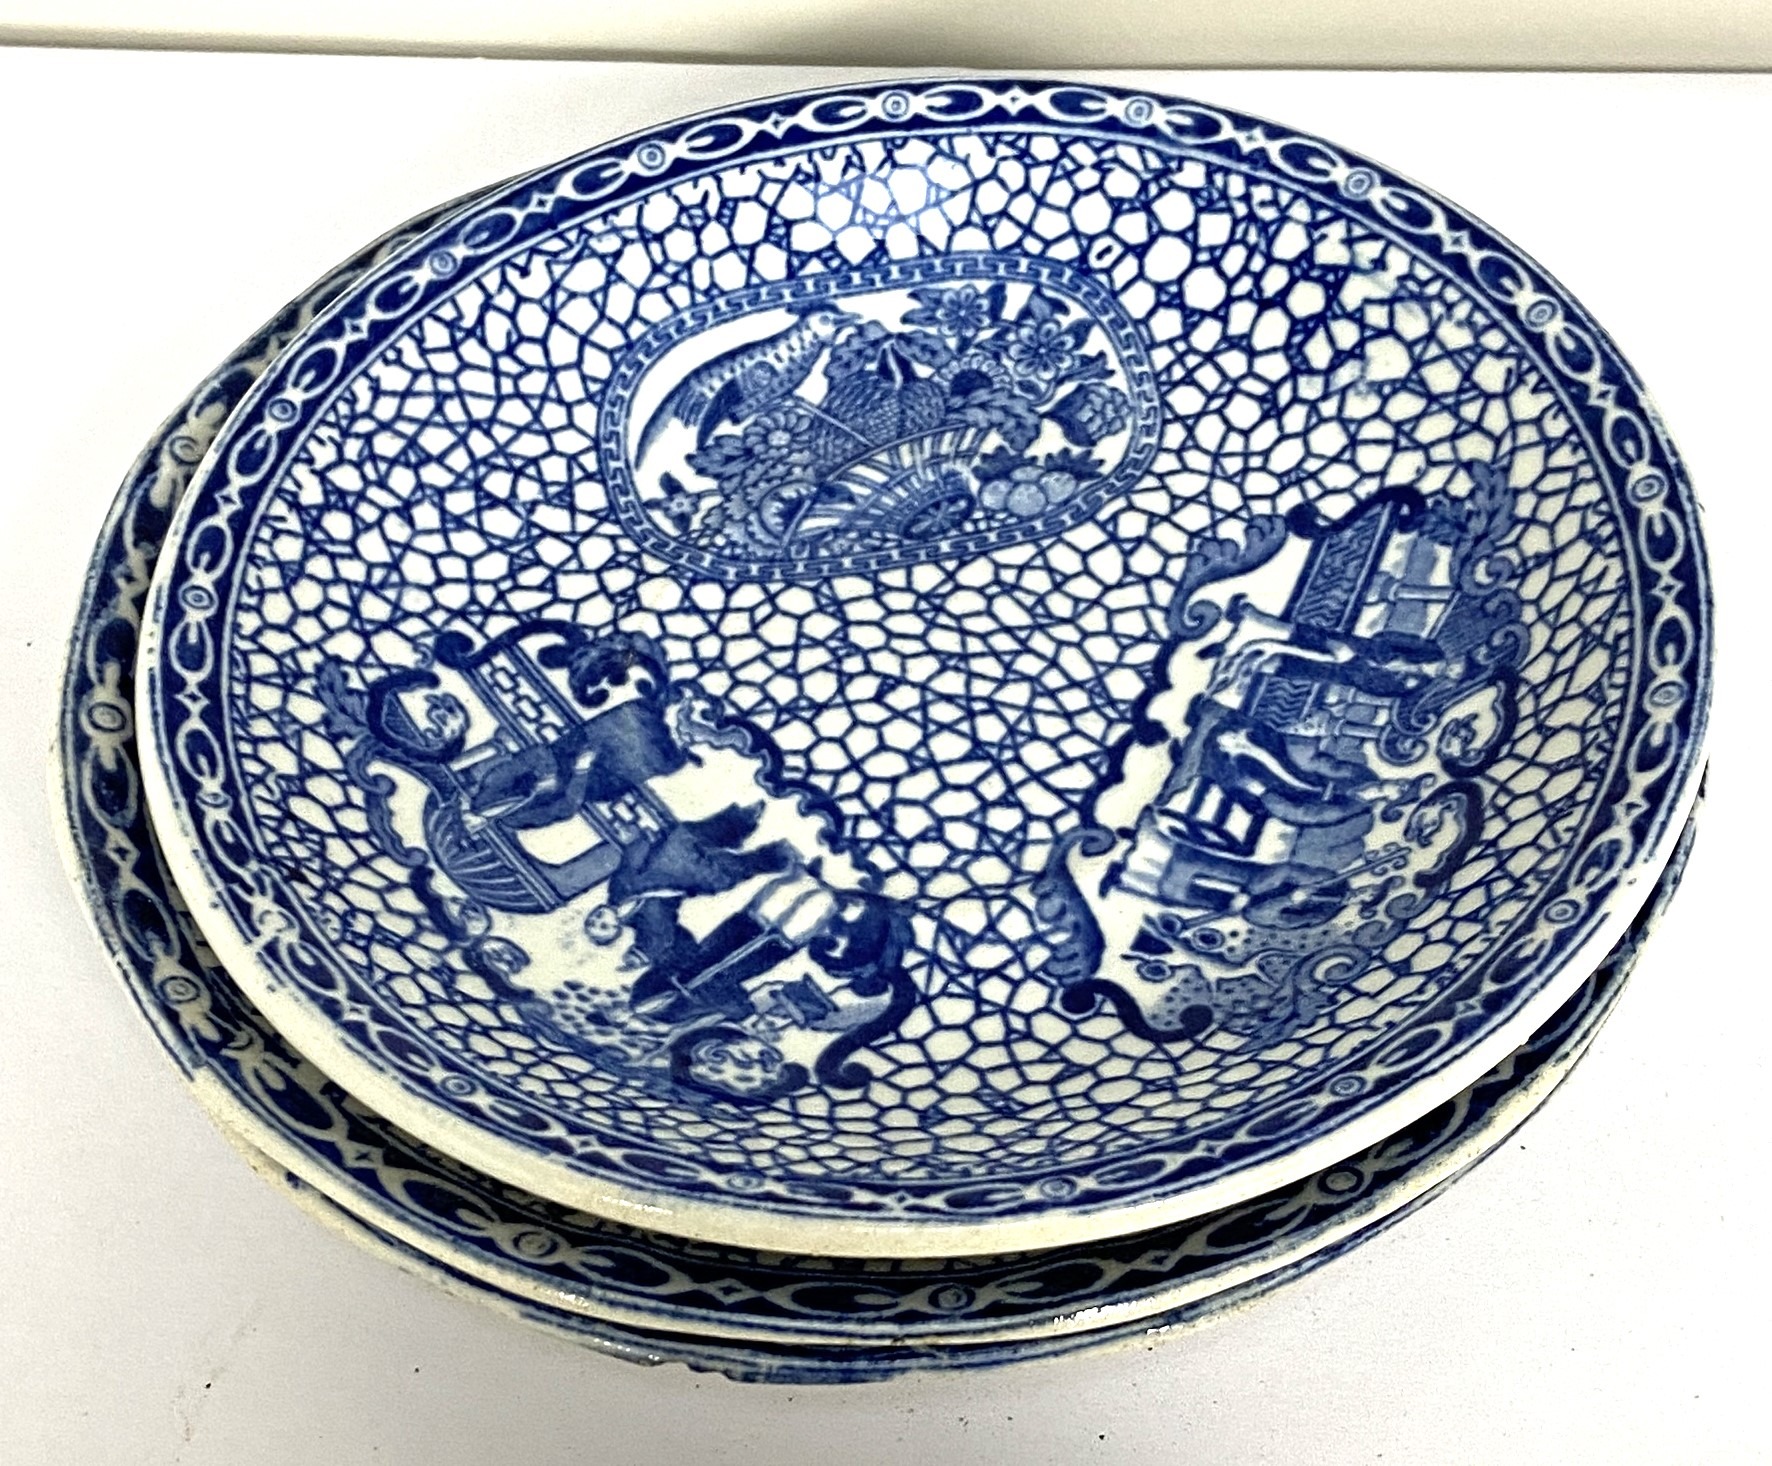 A selection of Adams Chinese pattern wares, including various platters, moon shaped salad dishes, - Image 8 of 10